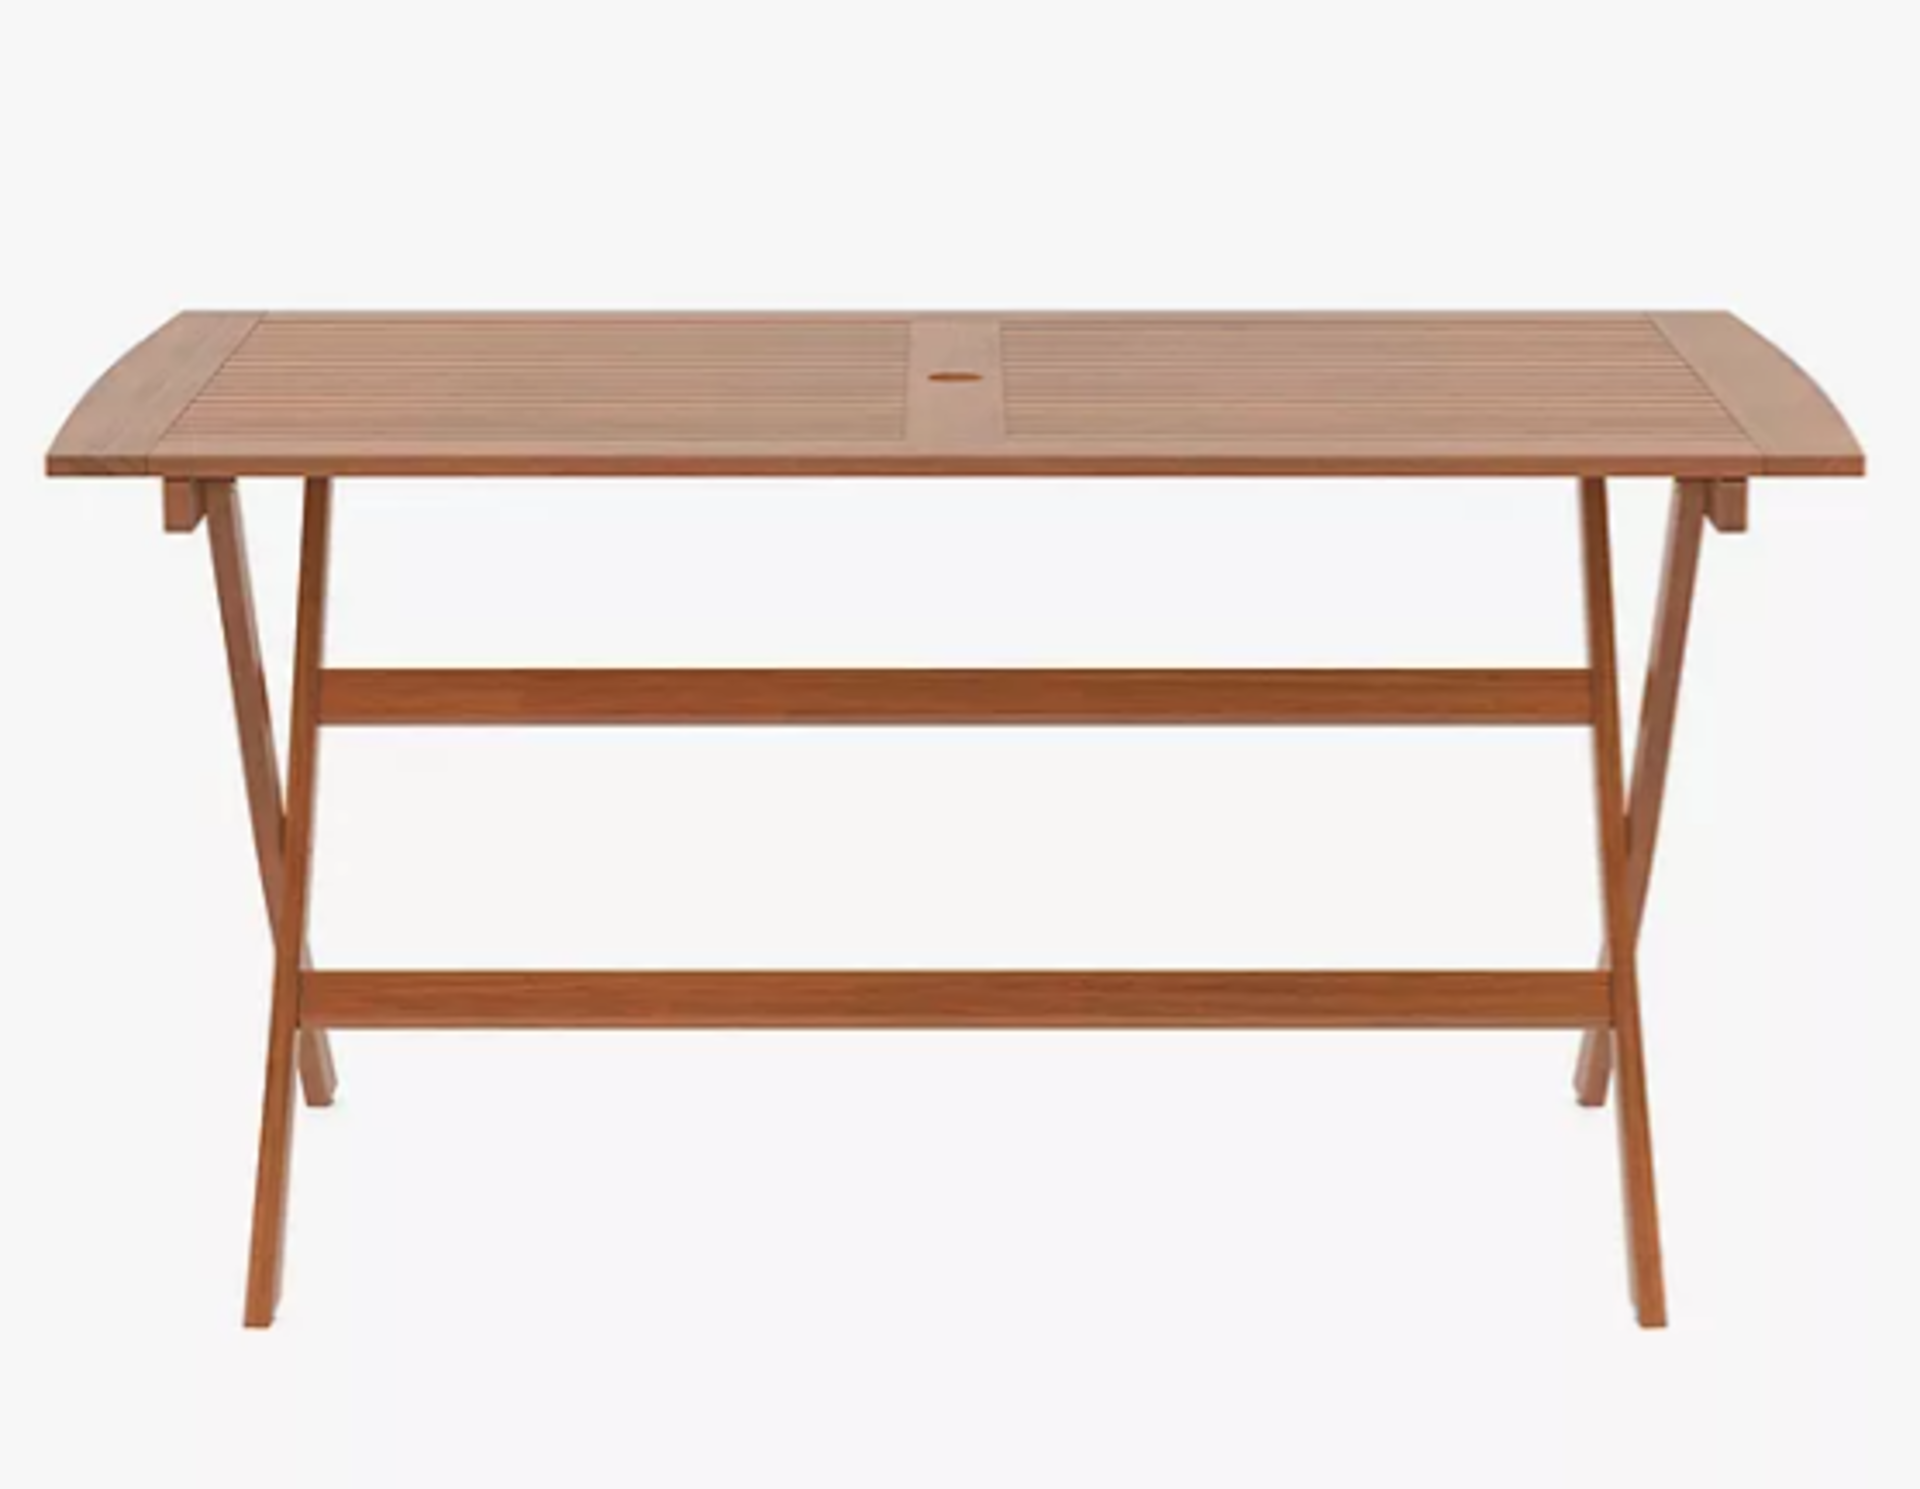 BRAND NEW JOHN LEWIS 6-Seater Folding Garden Dining Table, FSC-Certified (Eucalyptus Wood), Natural. - Image 3 of 3